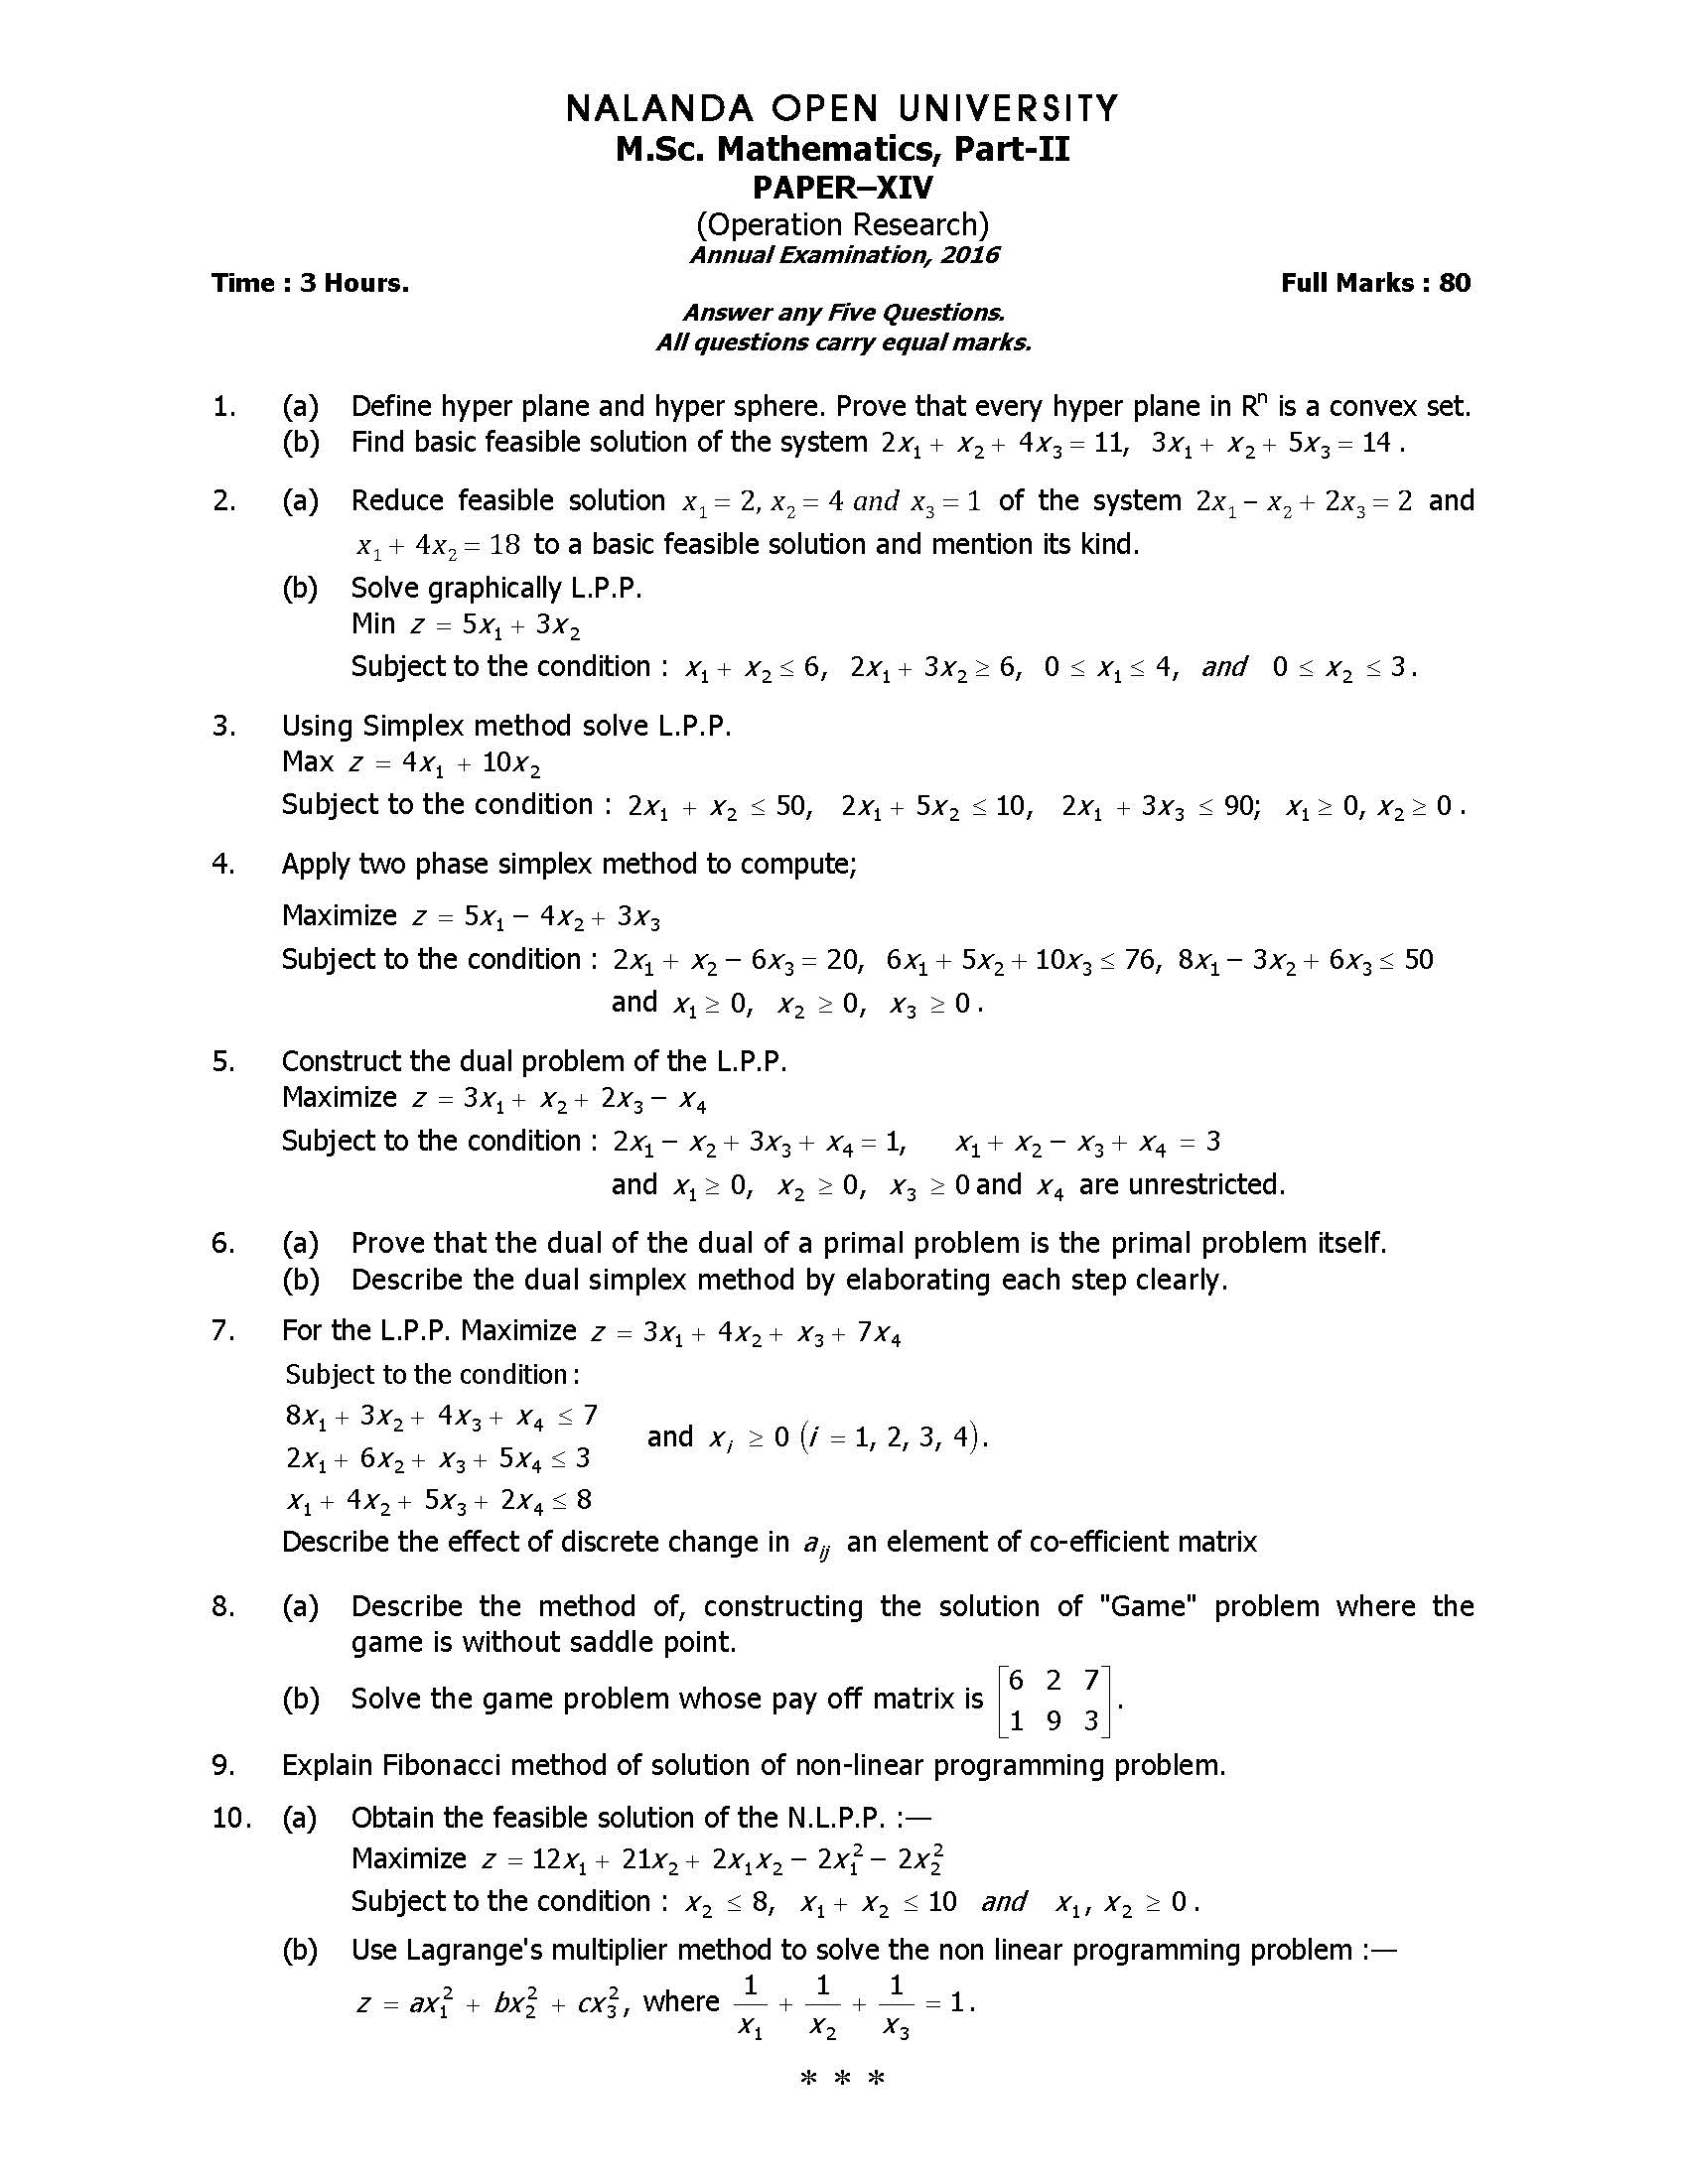 madras university operations research question paper